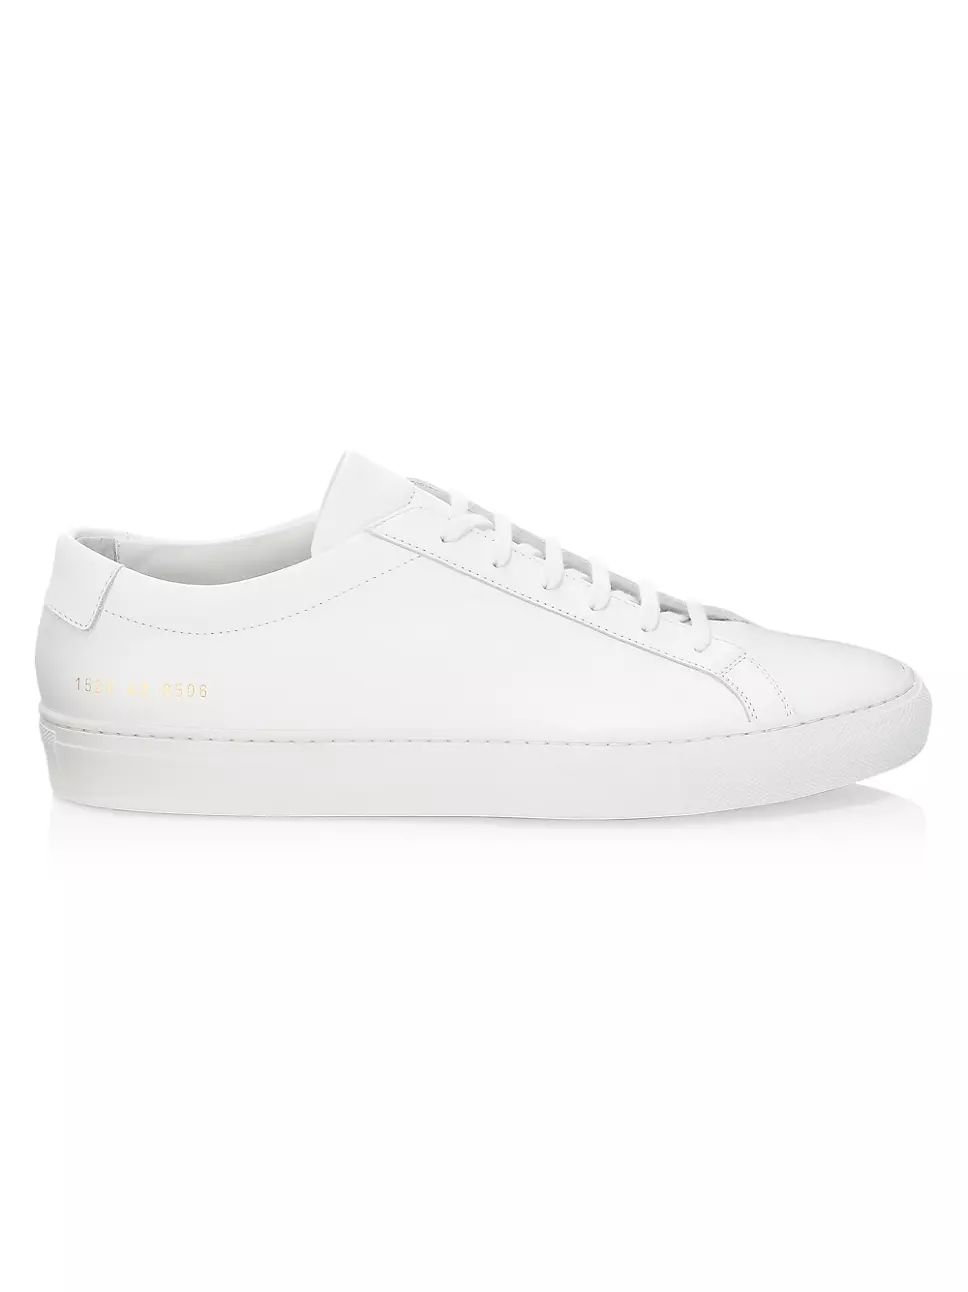 Common Projects Original Achilles Leather Low-Top Sneakers | Saks Fifth Avenue